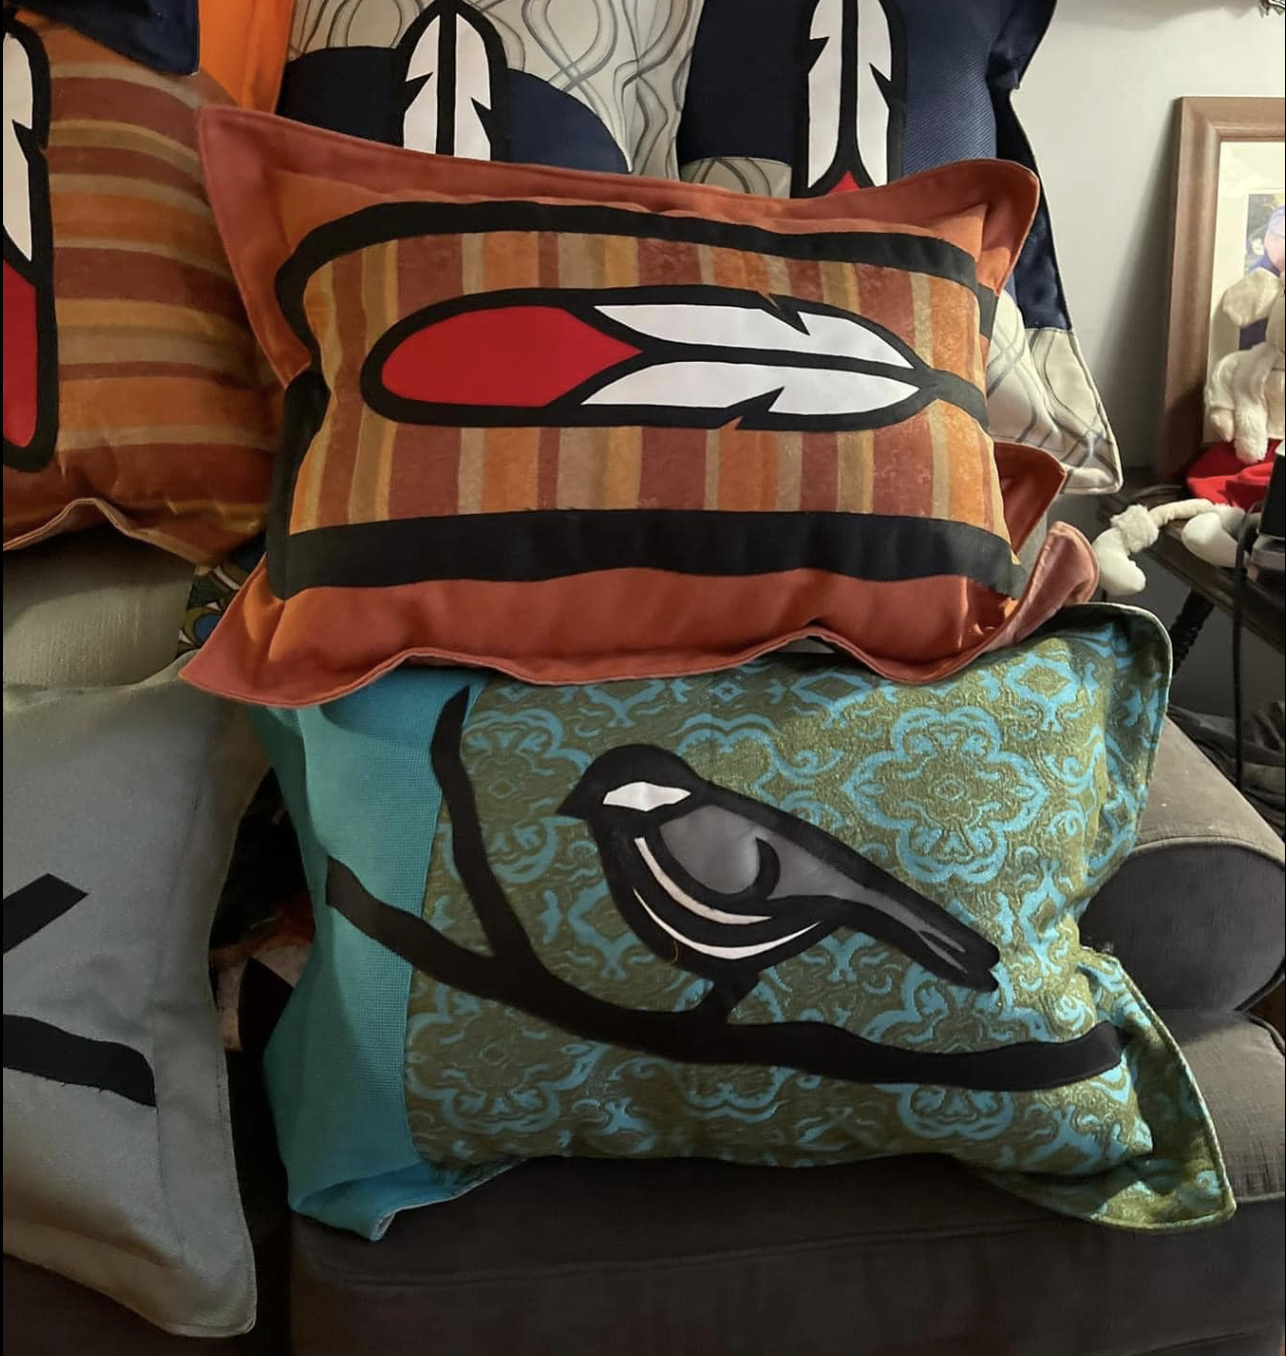 A series of colourful quilted pillows with beautiful chickadee and feather designs.